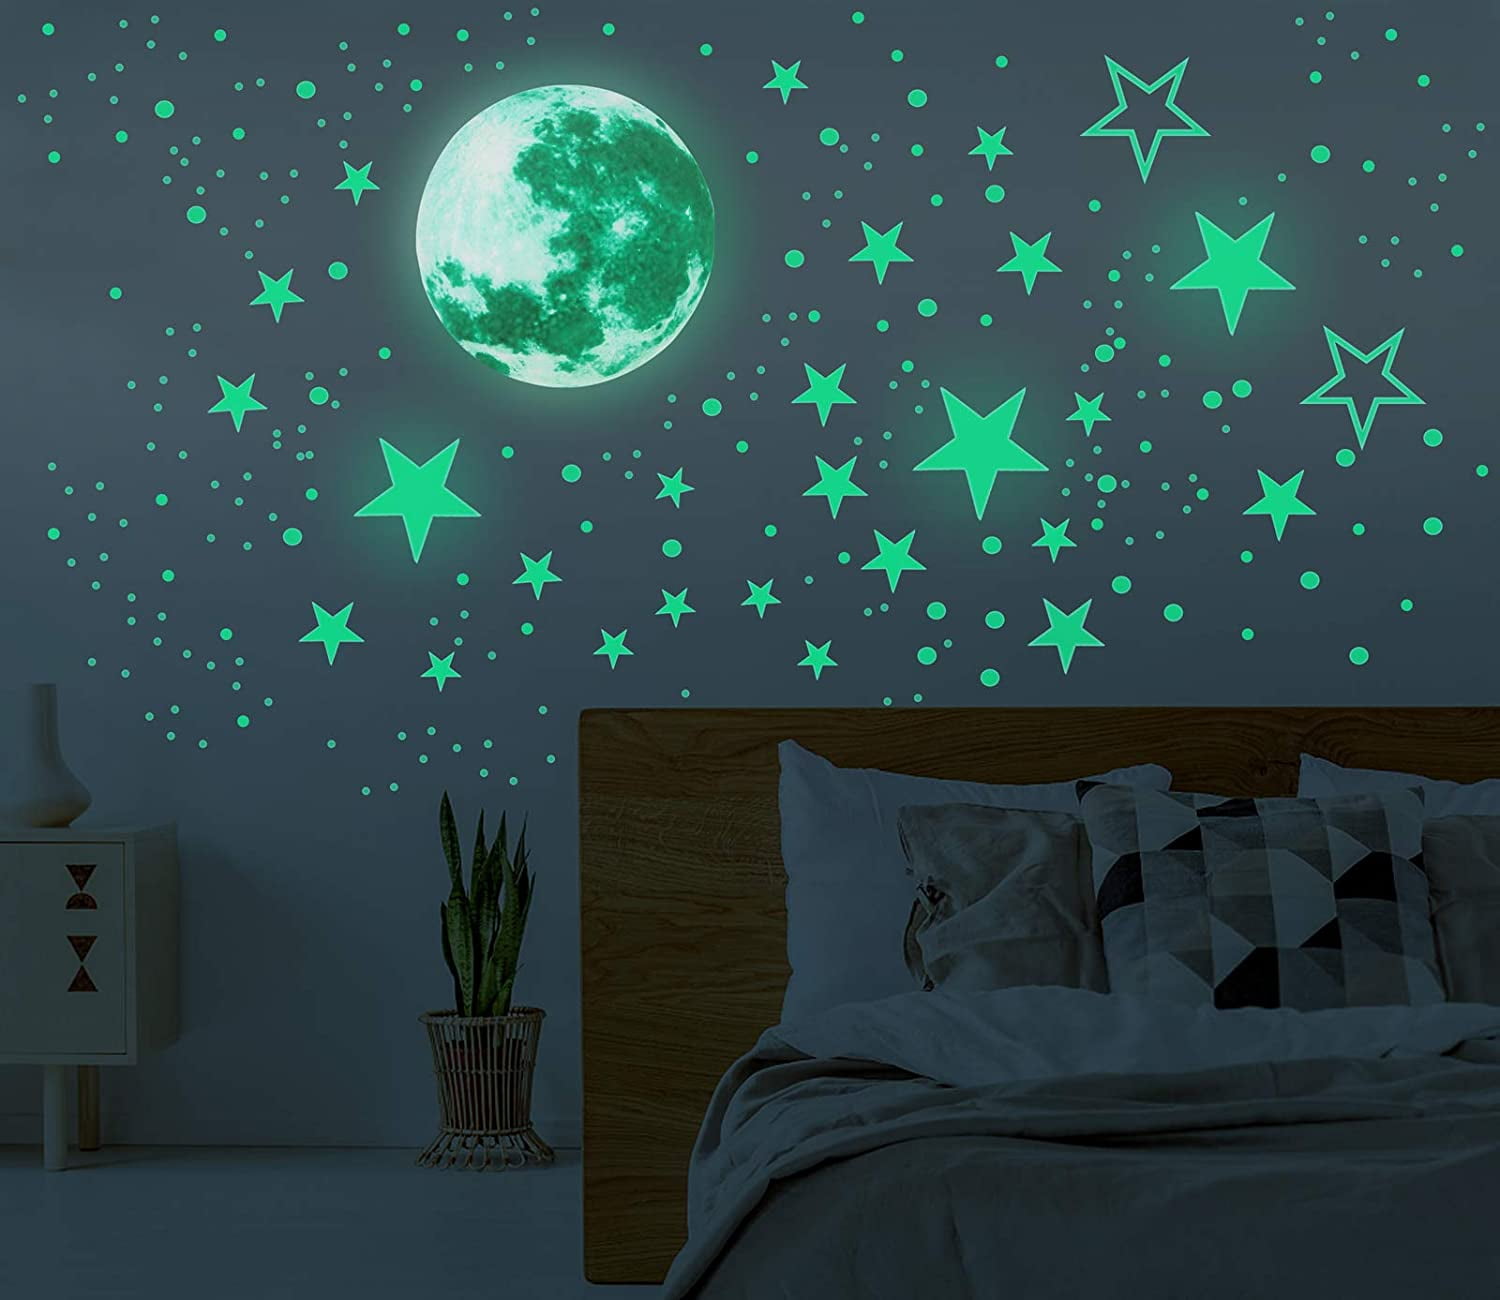 Details about   3D Glow In Dark Wall Sticker Energy Storage Moon Earth Home Decoration Luminous 